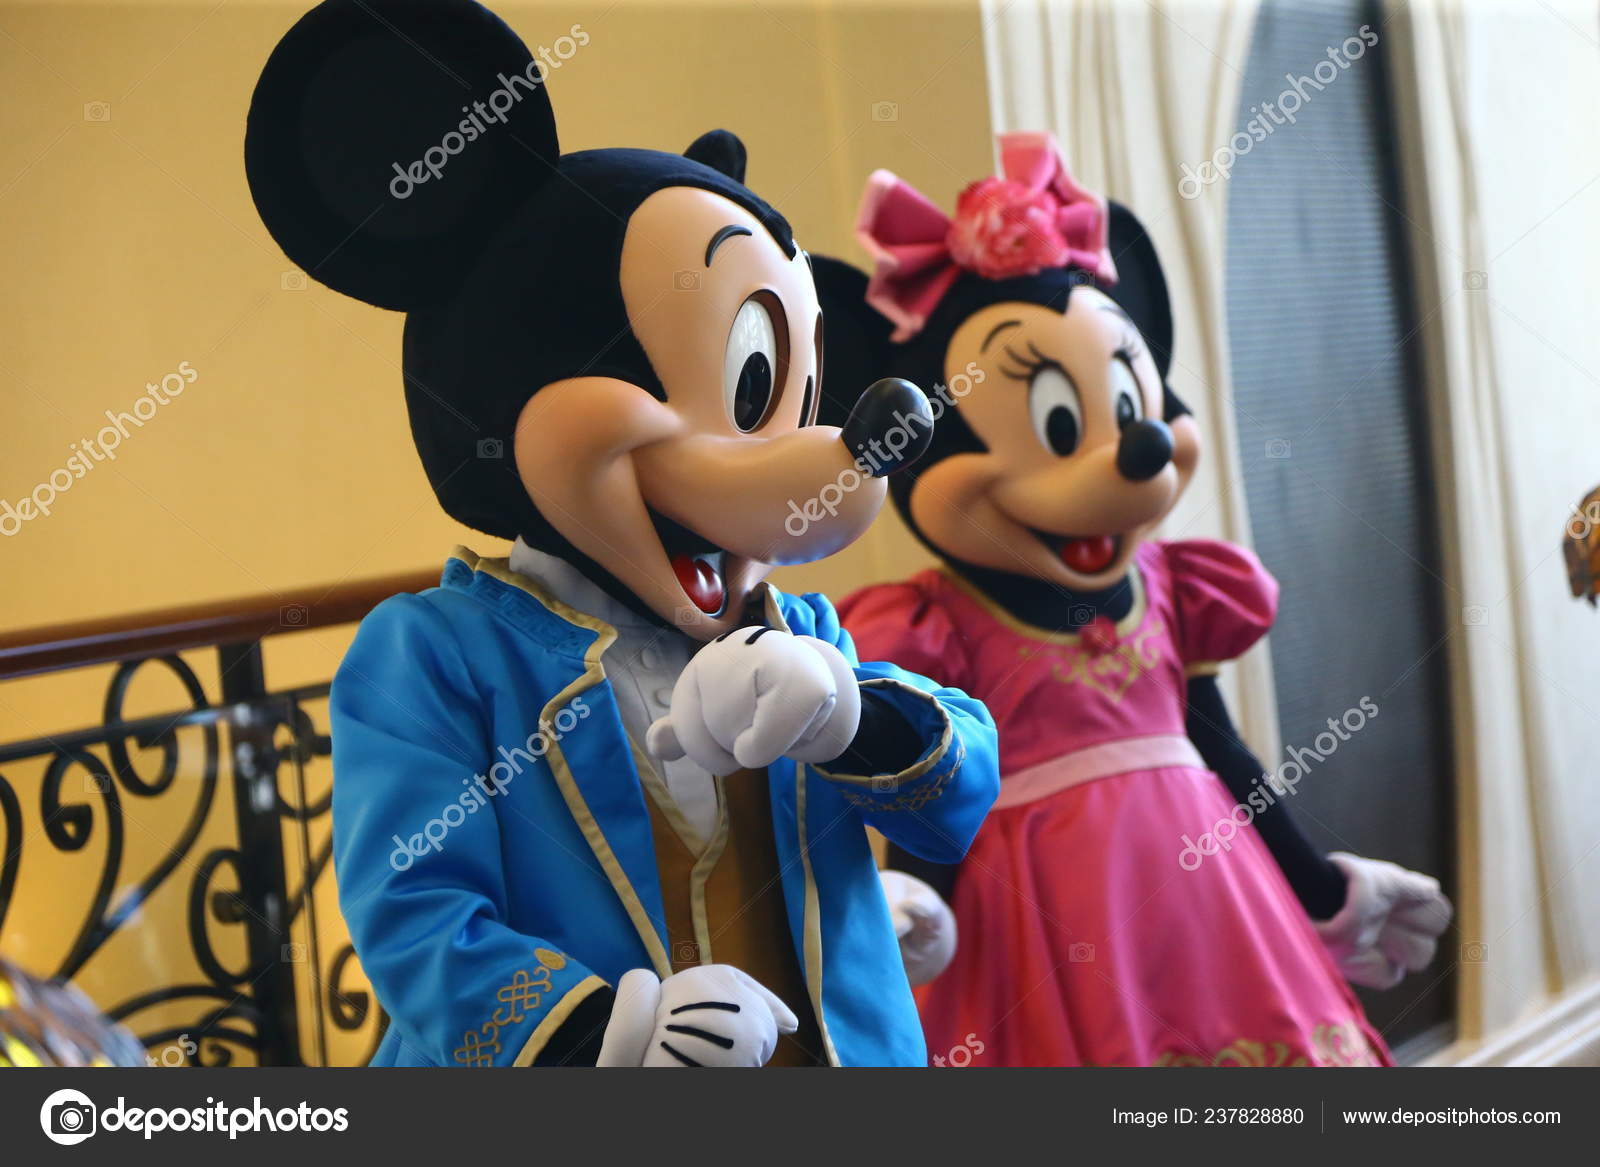 Vervelend uitglijden Archeoloog Entertainers Dressed Mickey Mouse Minnie Mouse Costumes Pose Photos  Shanghai – Stock Editorial Photo © ChinaImages #237828880